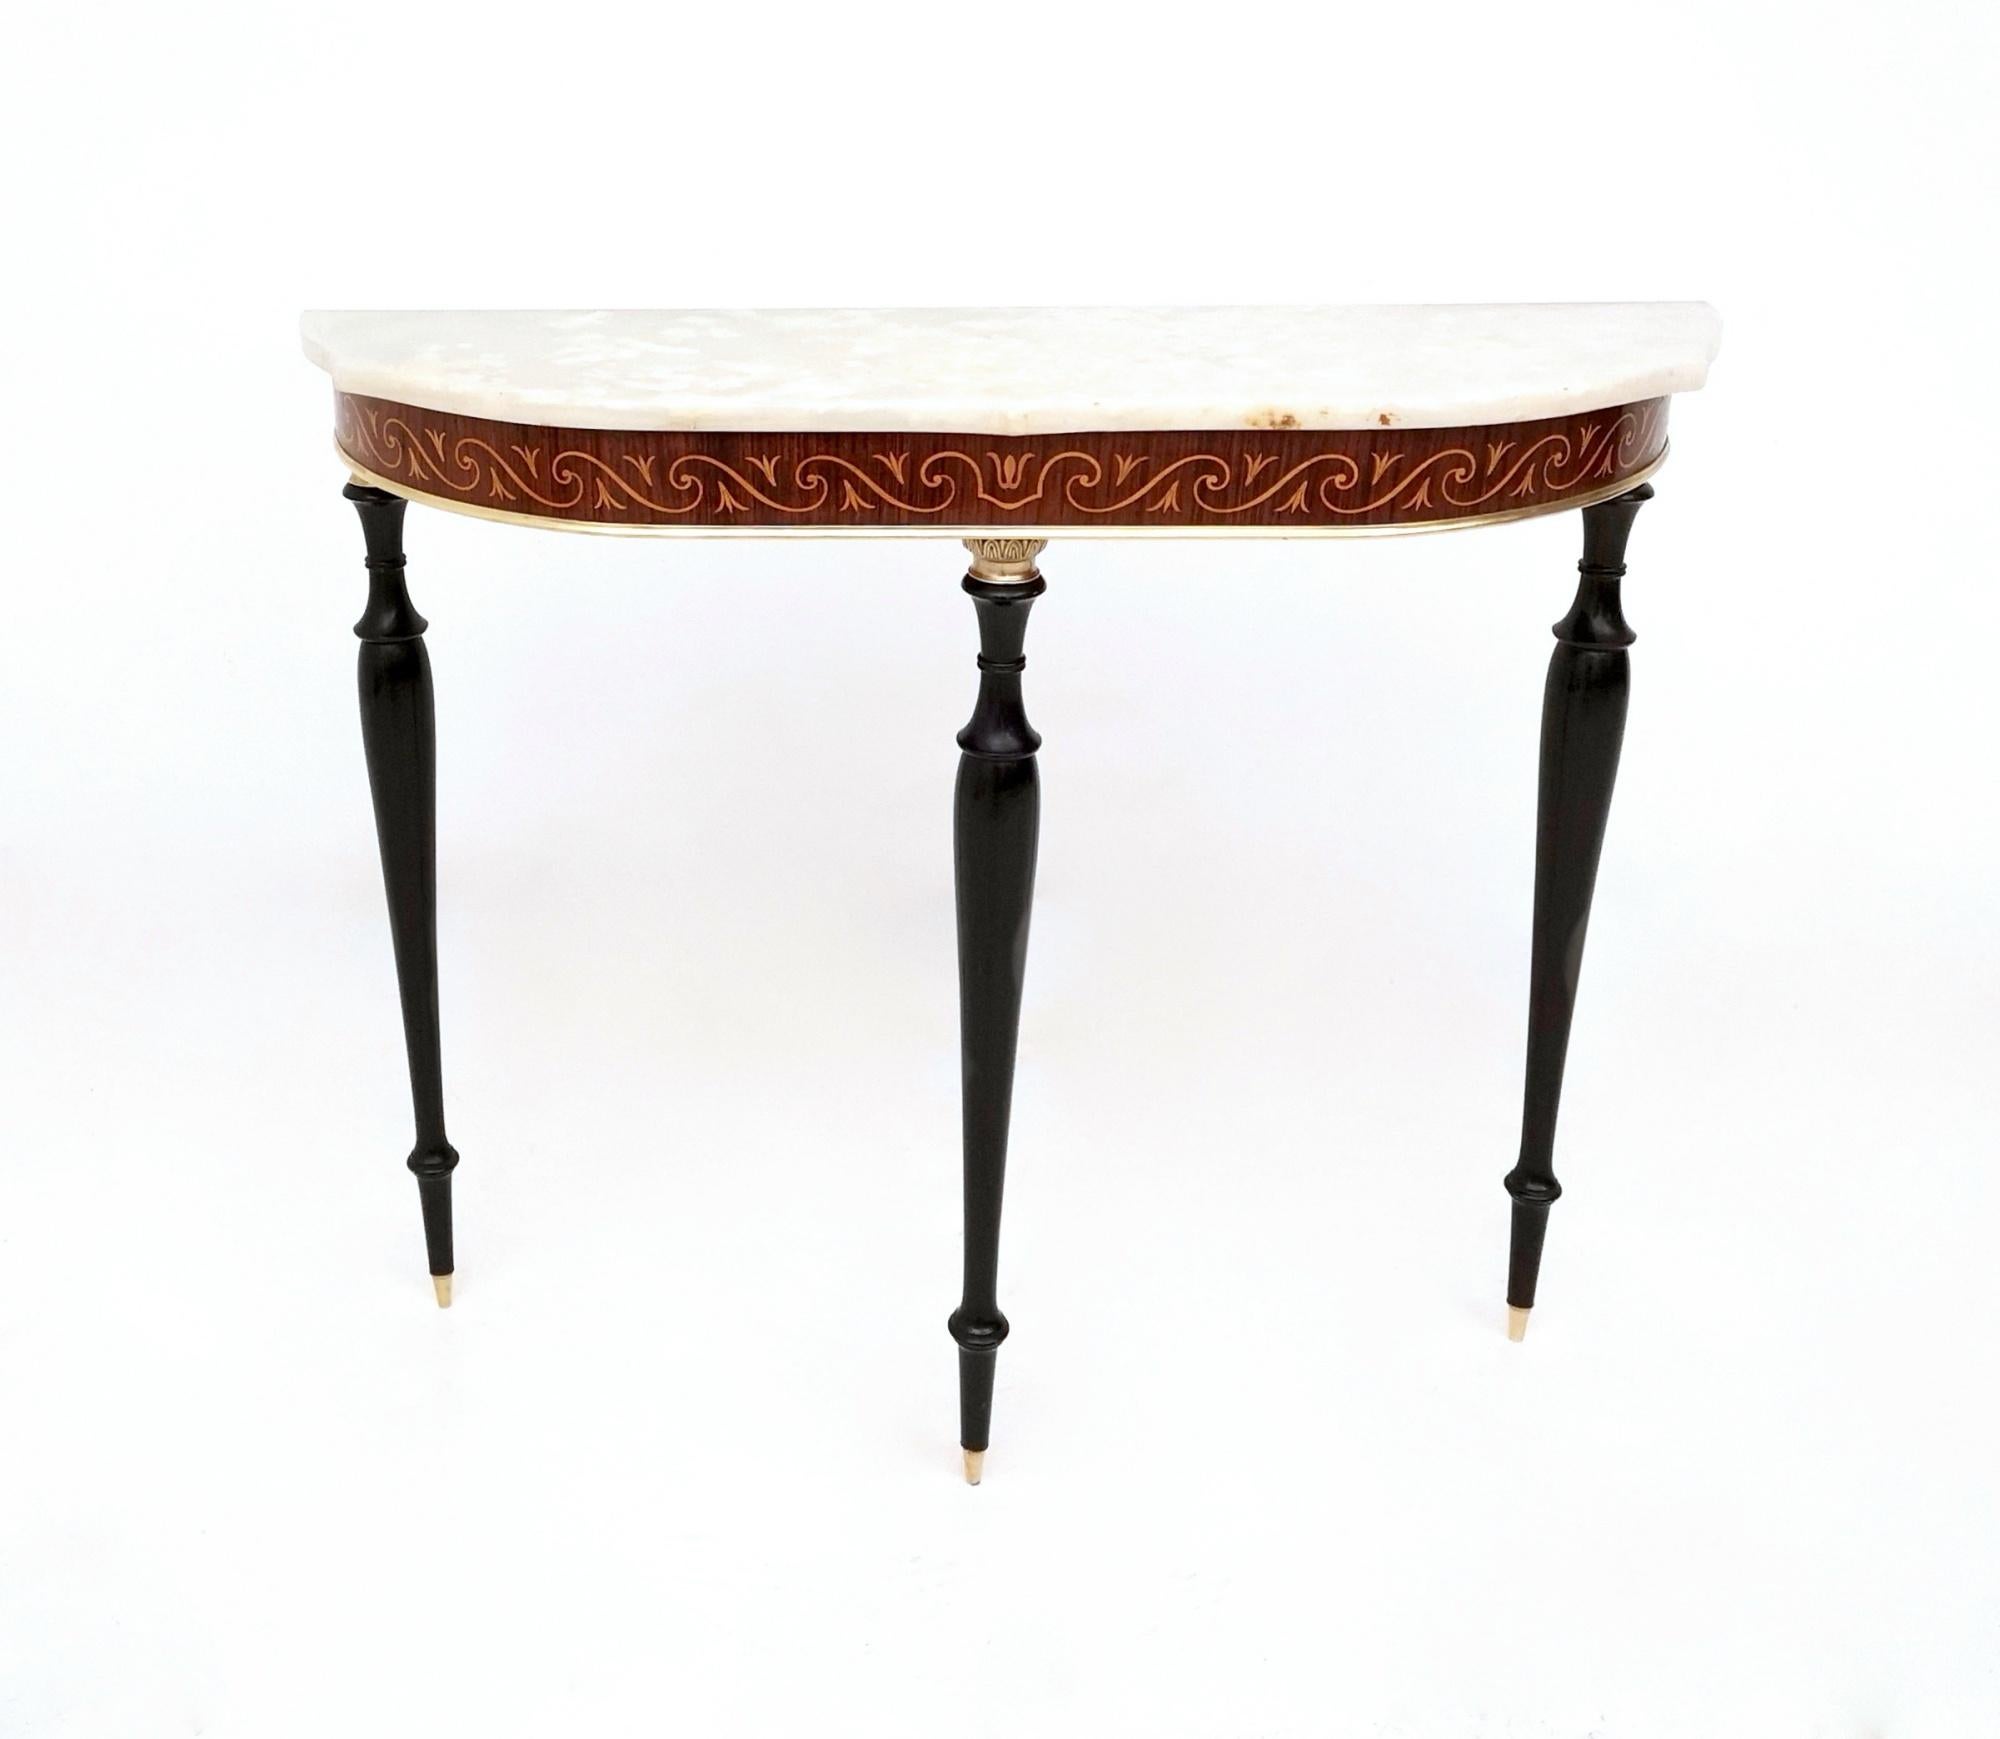 Mid-Century Modern Vintage  Wooden Console Table with Demilune Onyx Top and Inlaid Edges, Italy